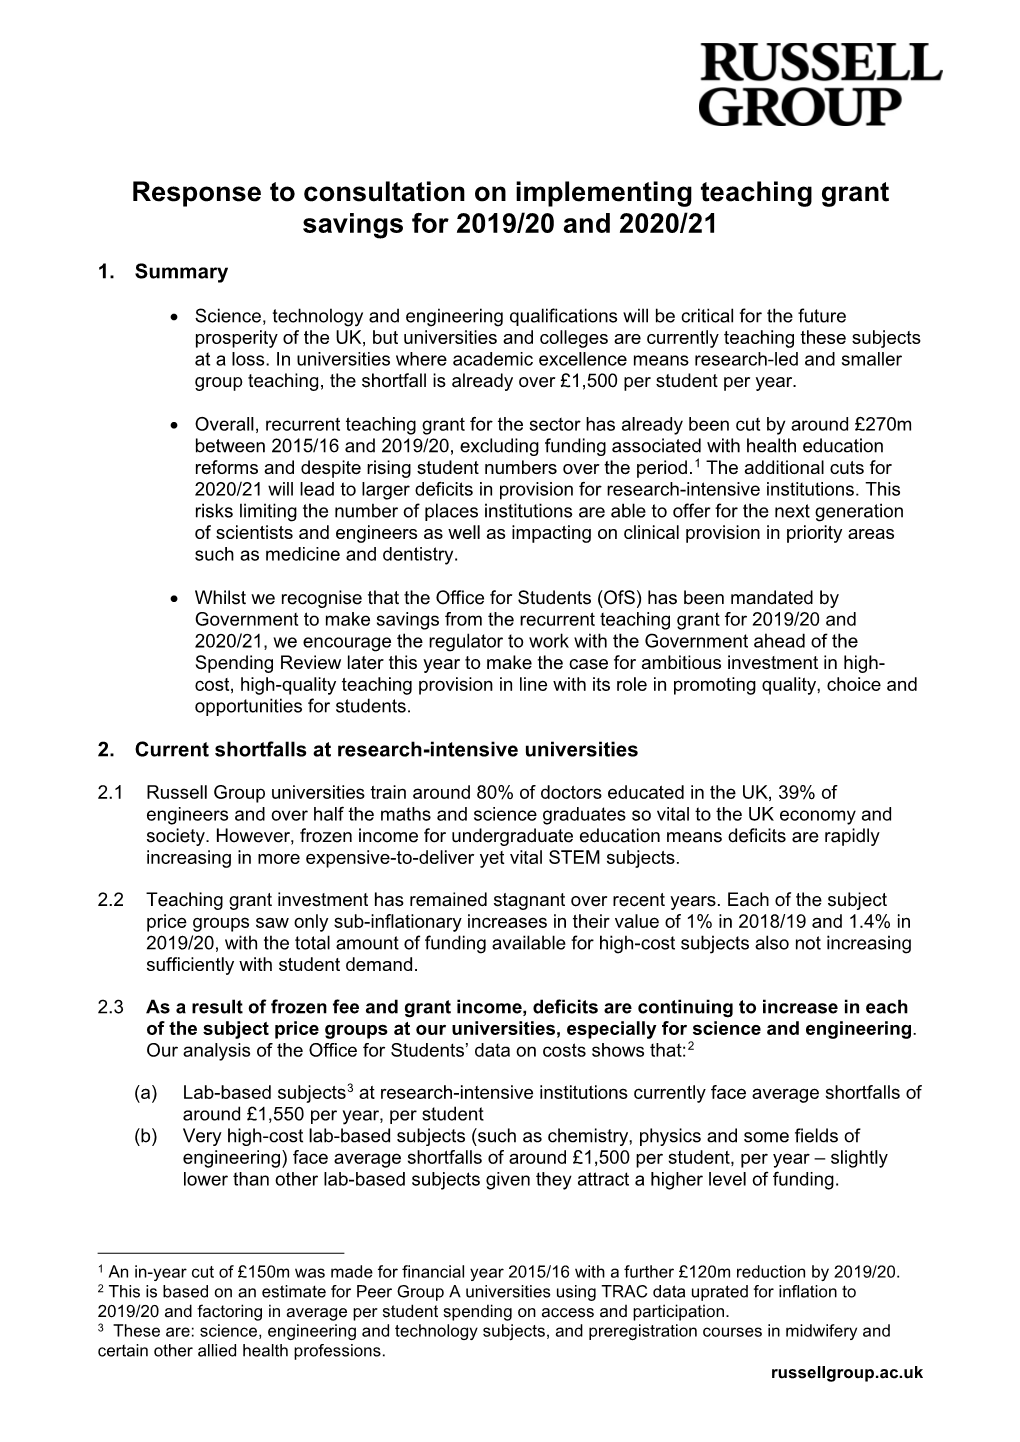 Response to Consultation on Implementing Teaching Grant Savings for 2019/20 and 2020/21